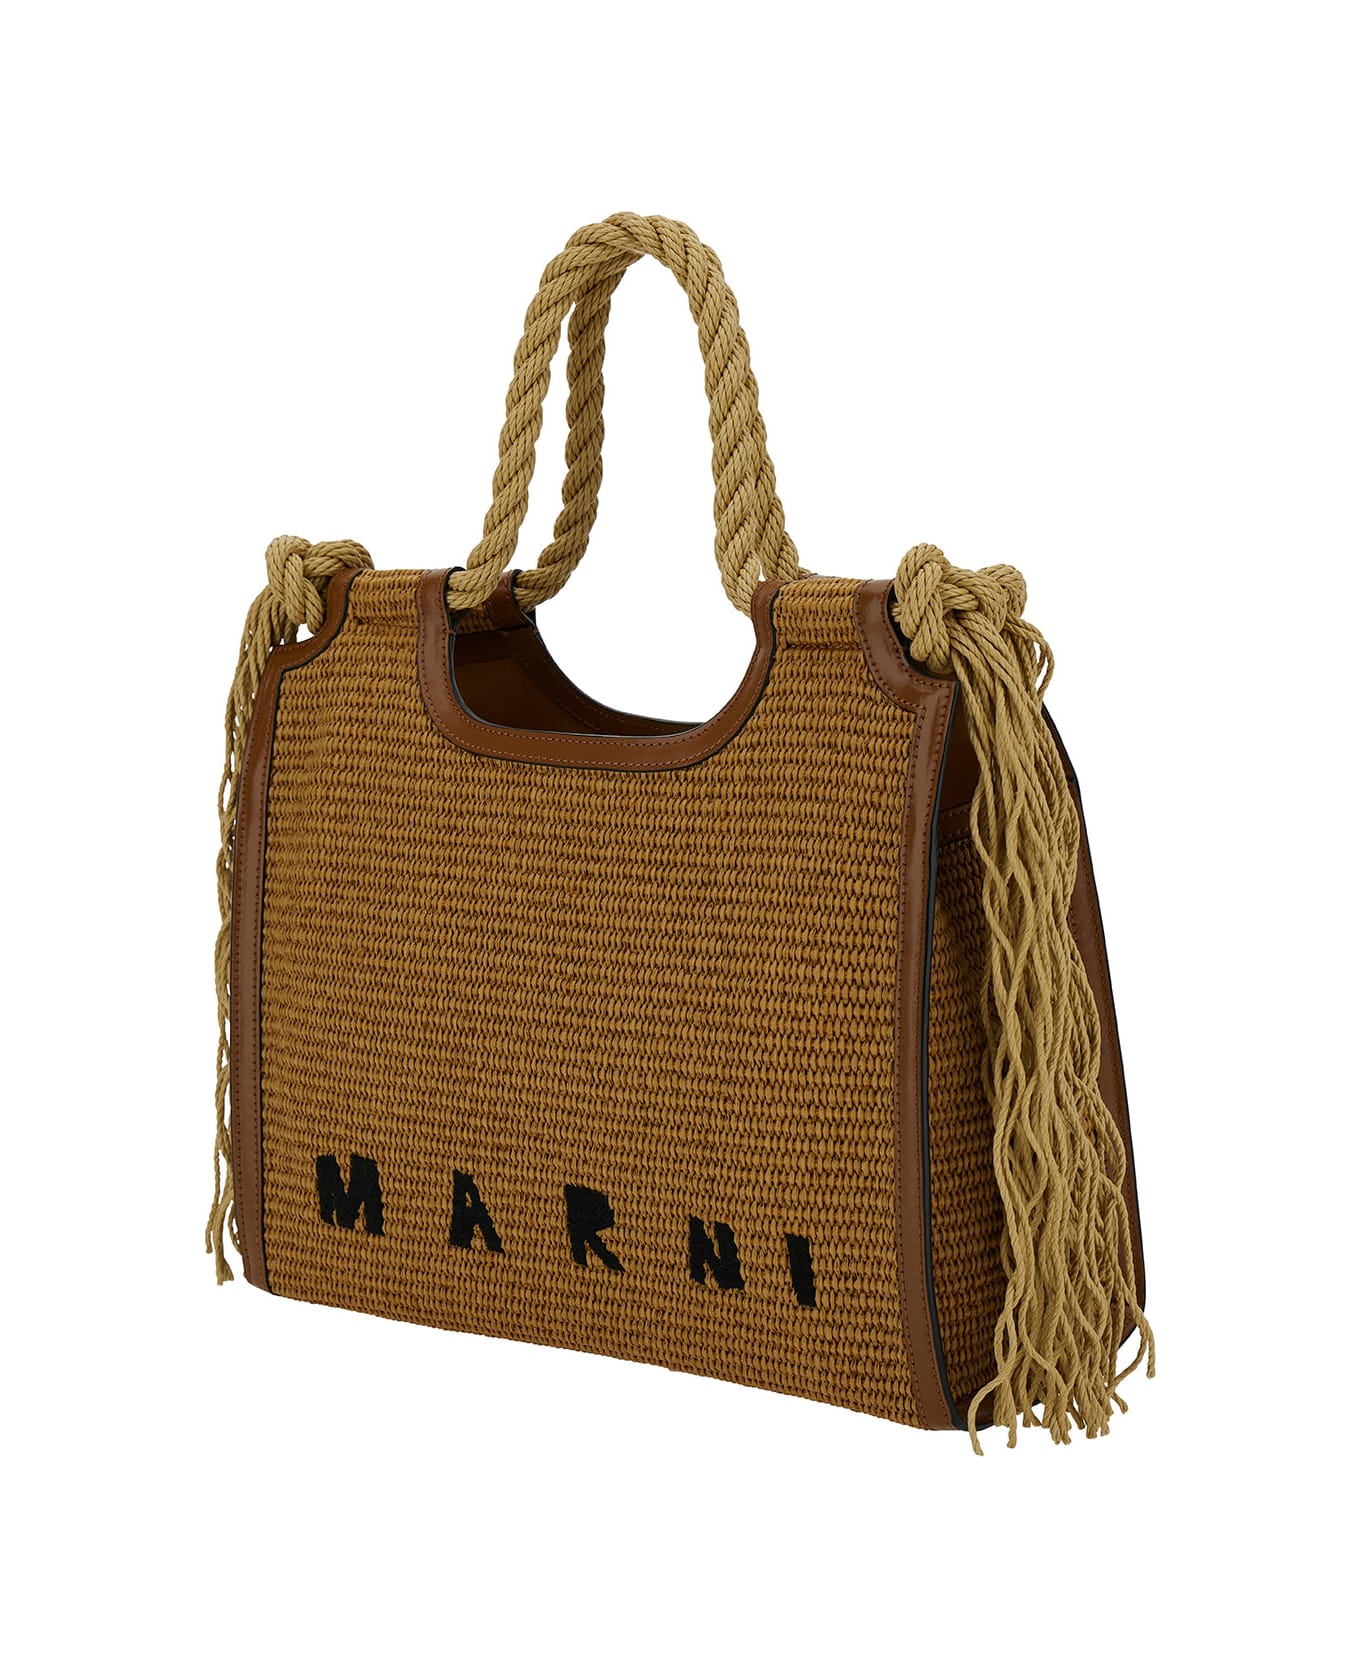 Marni 'summer' Beige Tote Bag With Cord Handles And Logo Detail In Rafia Woman - Beige トートバッグ